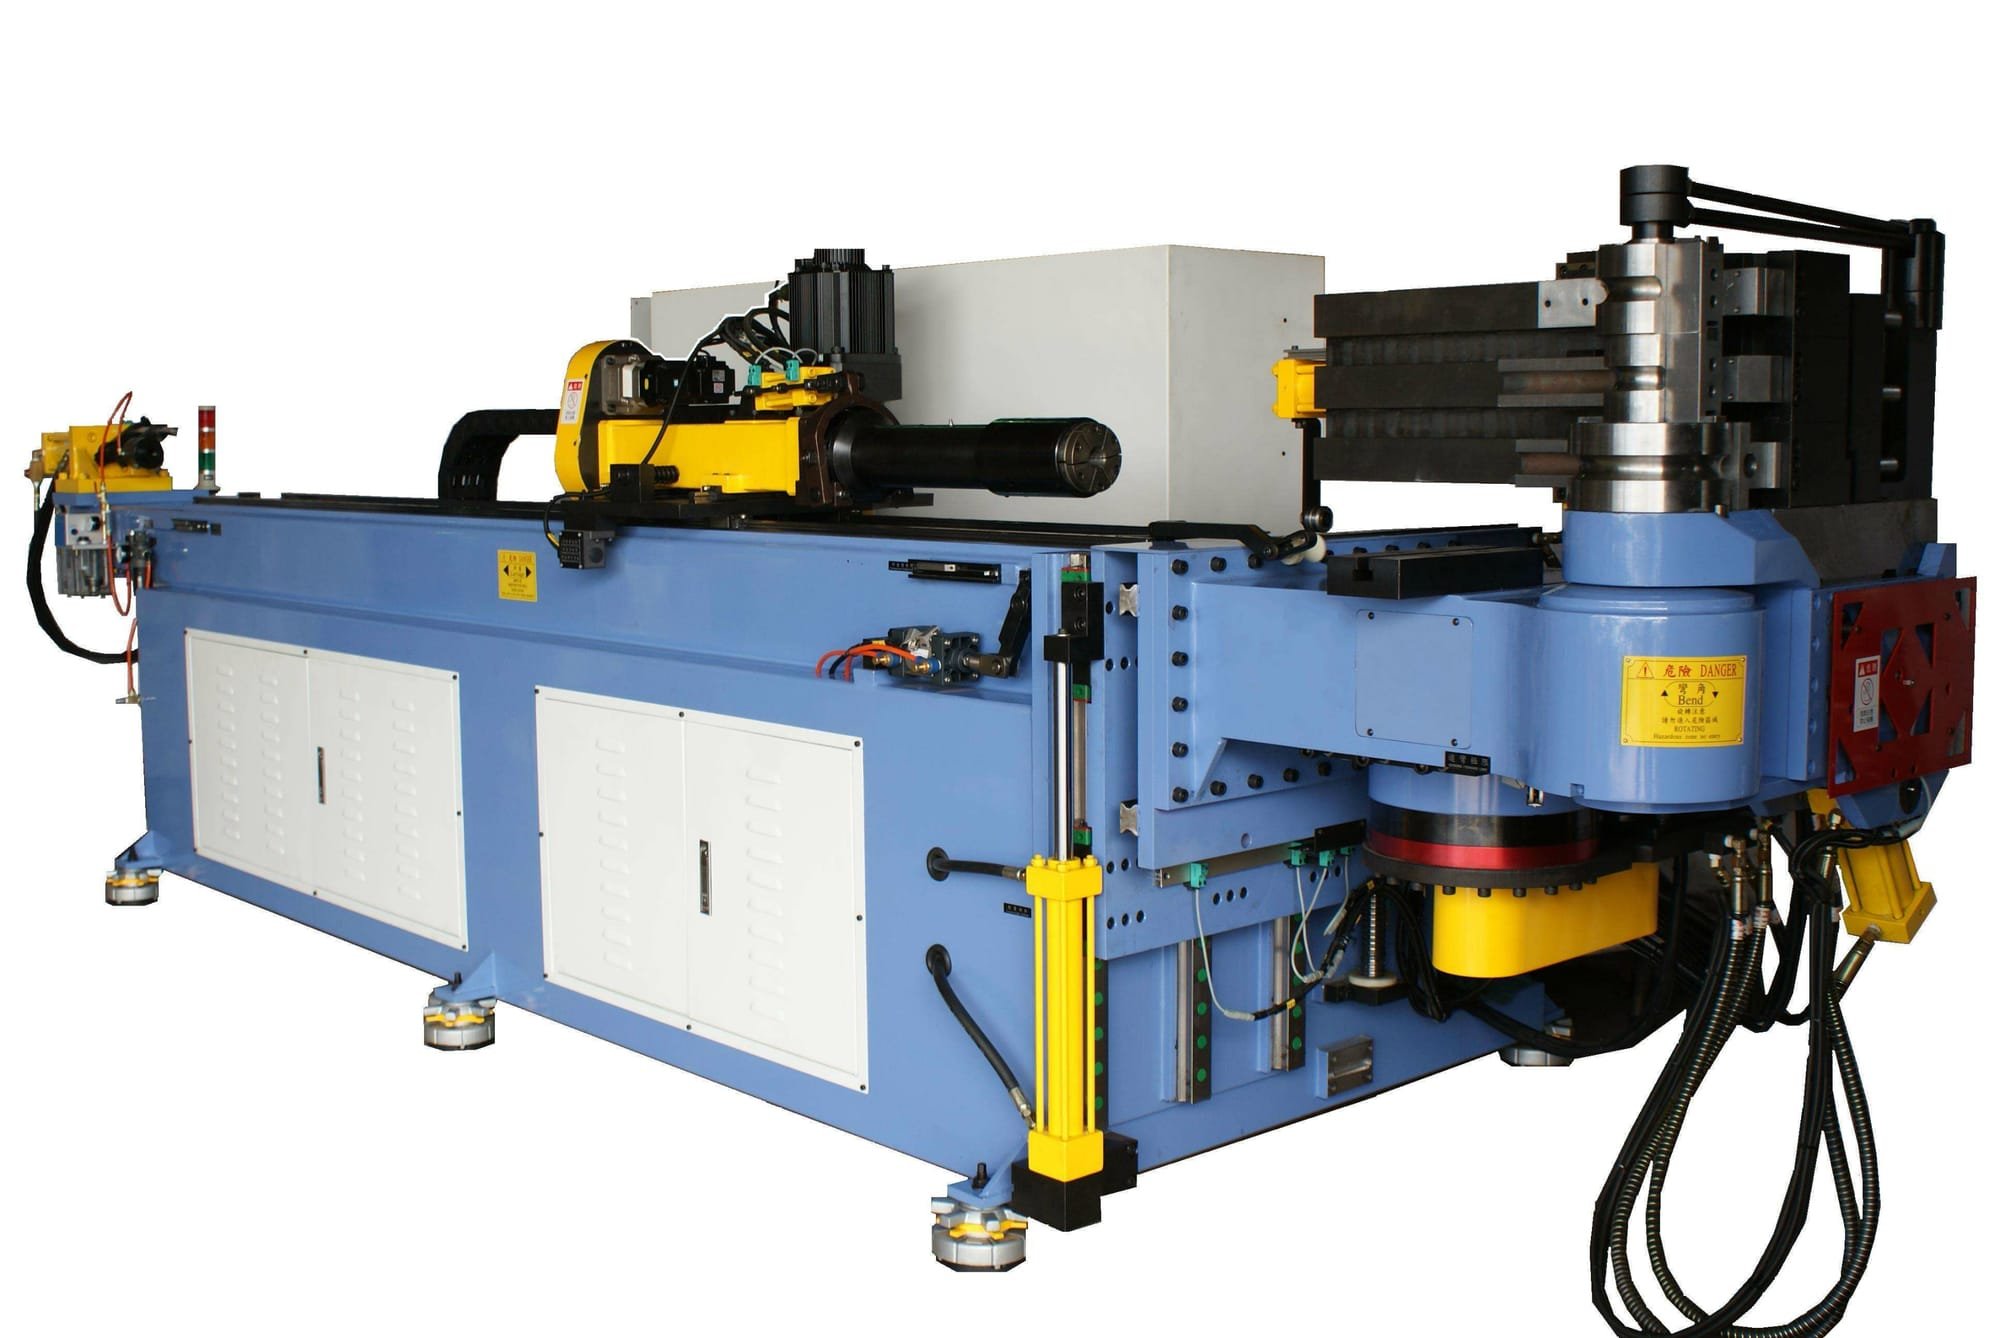 Introduce the application field of tube bending dies and molds for automatic pipe bending machine